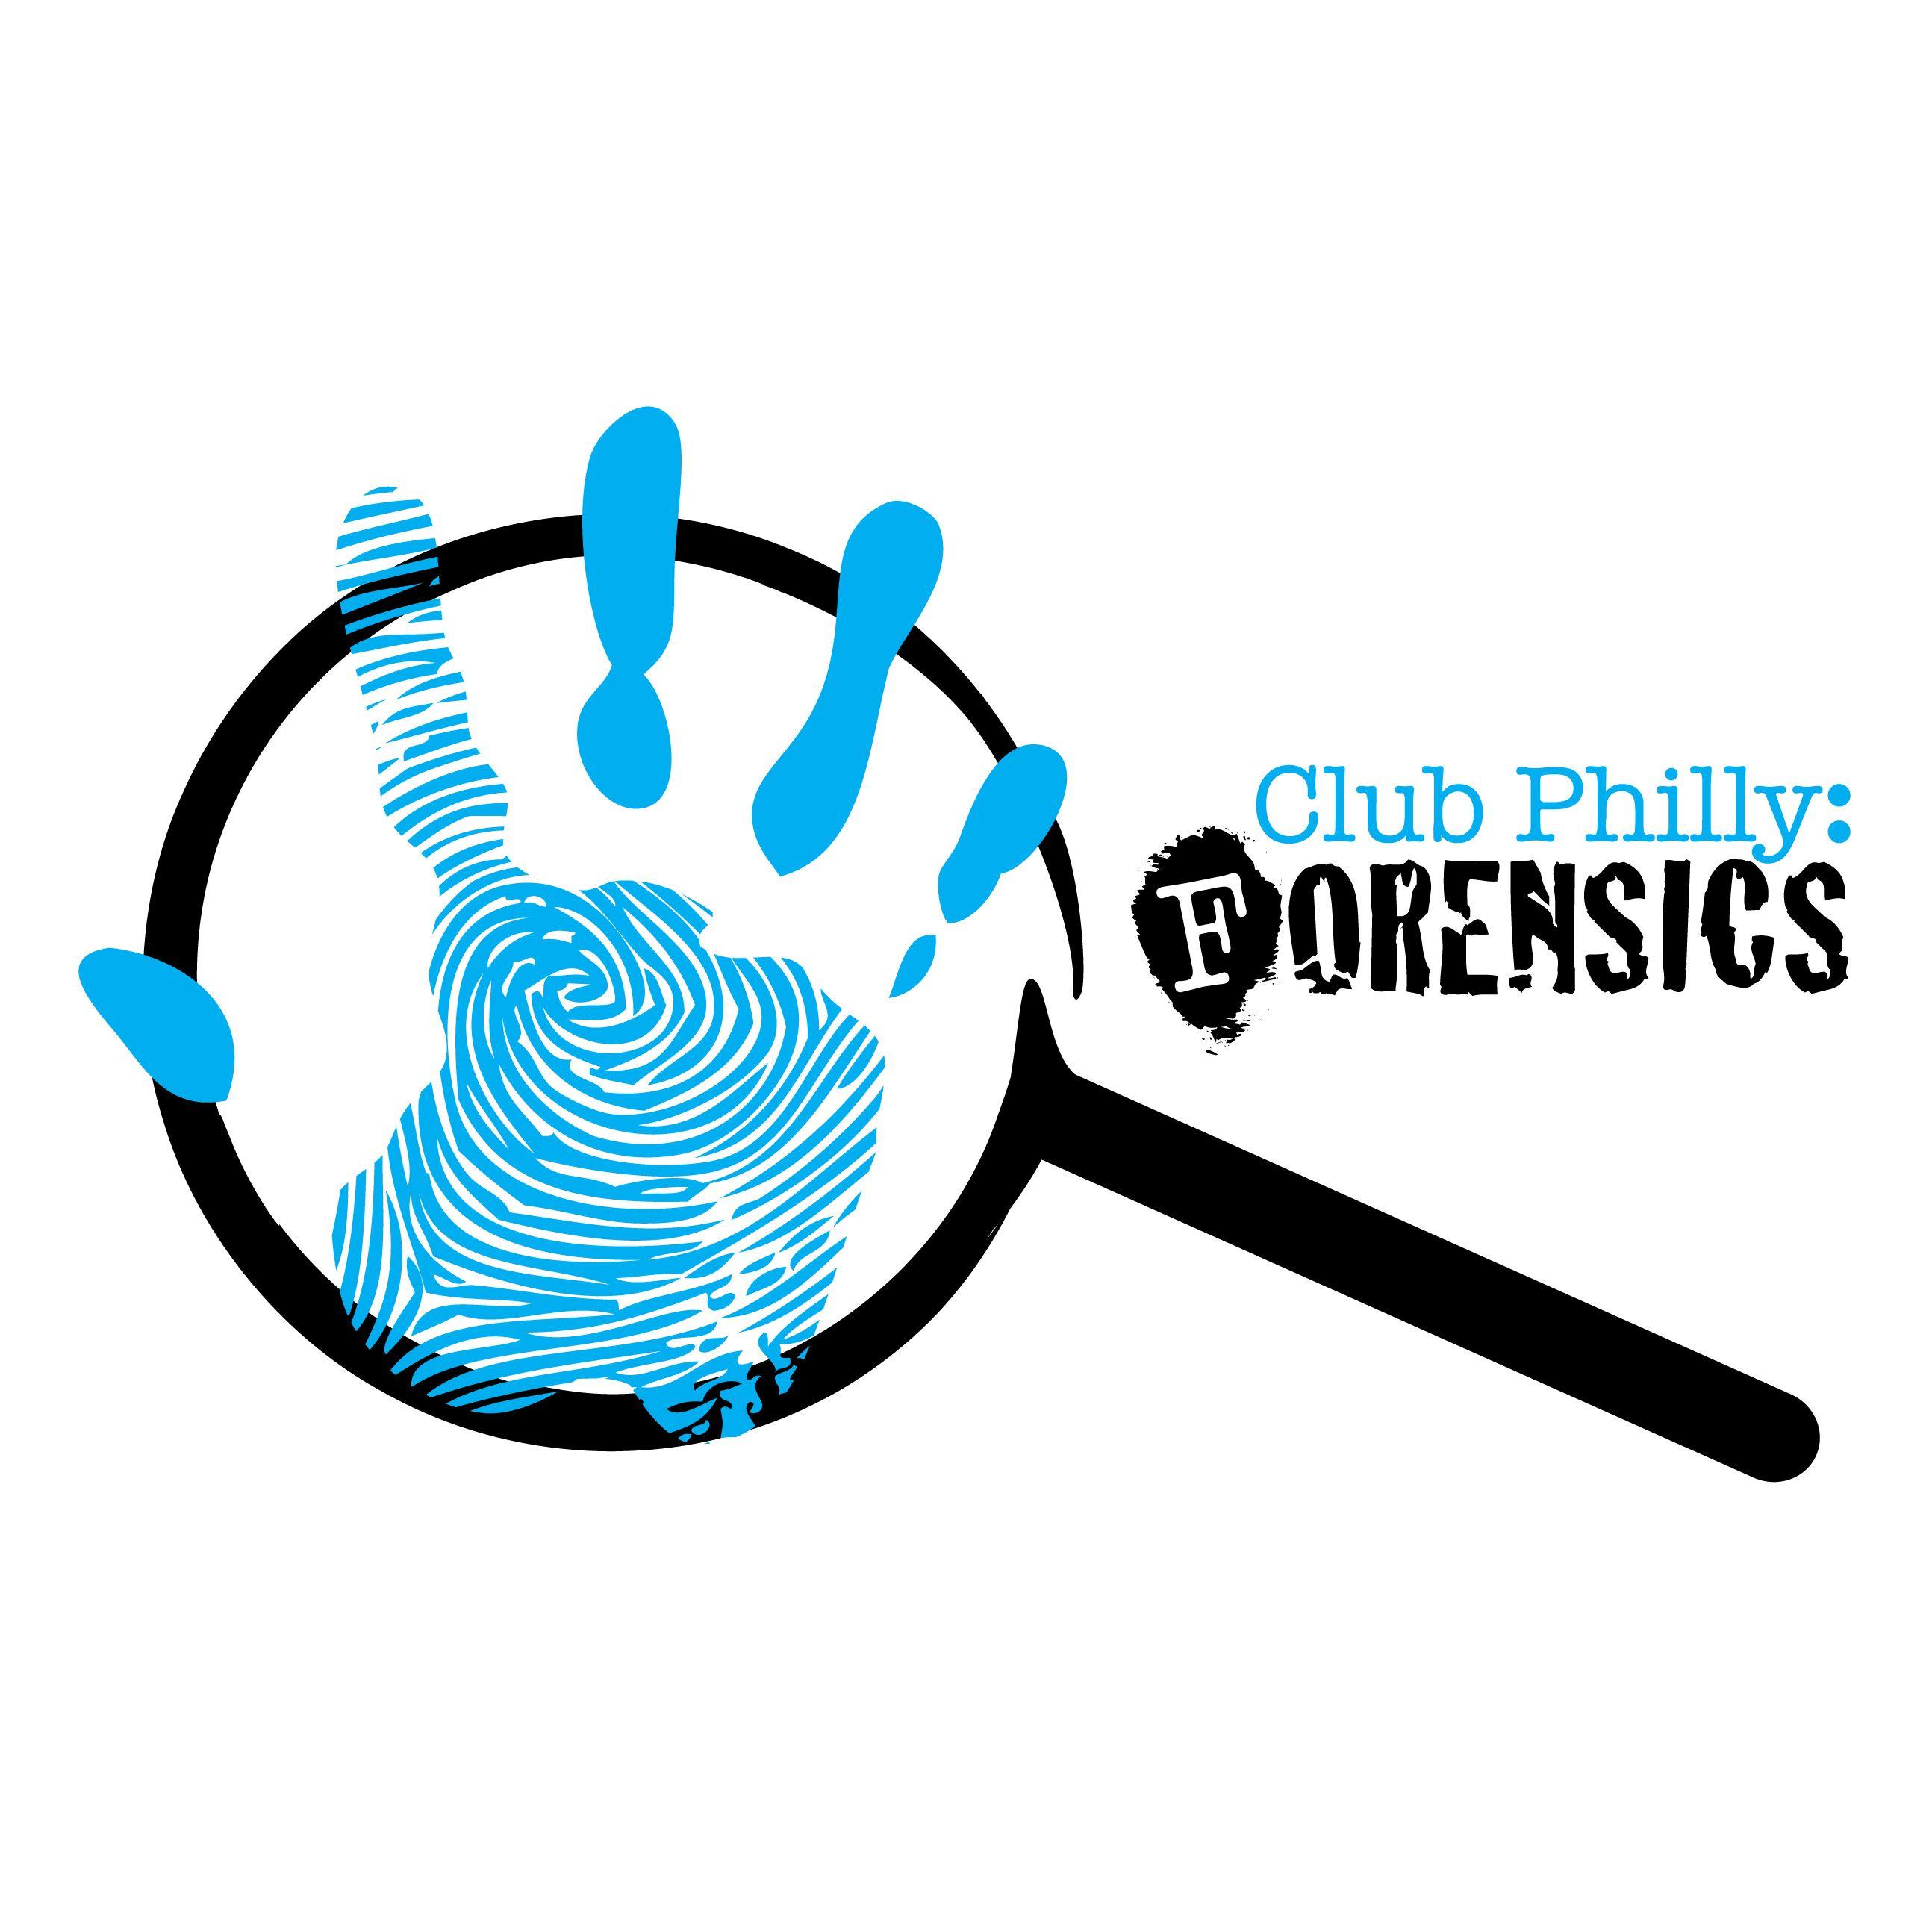 Forensic Science Wallpapers Top Free Forensic Science Backgrounds